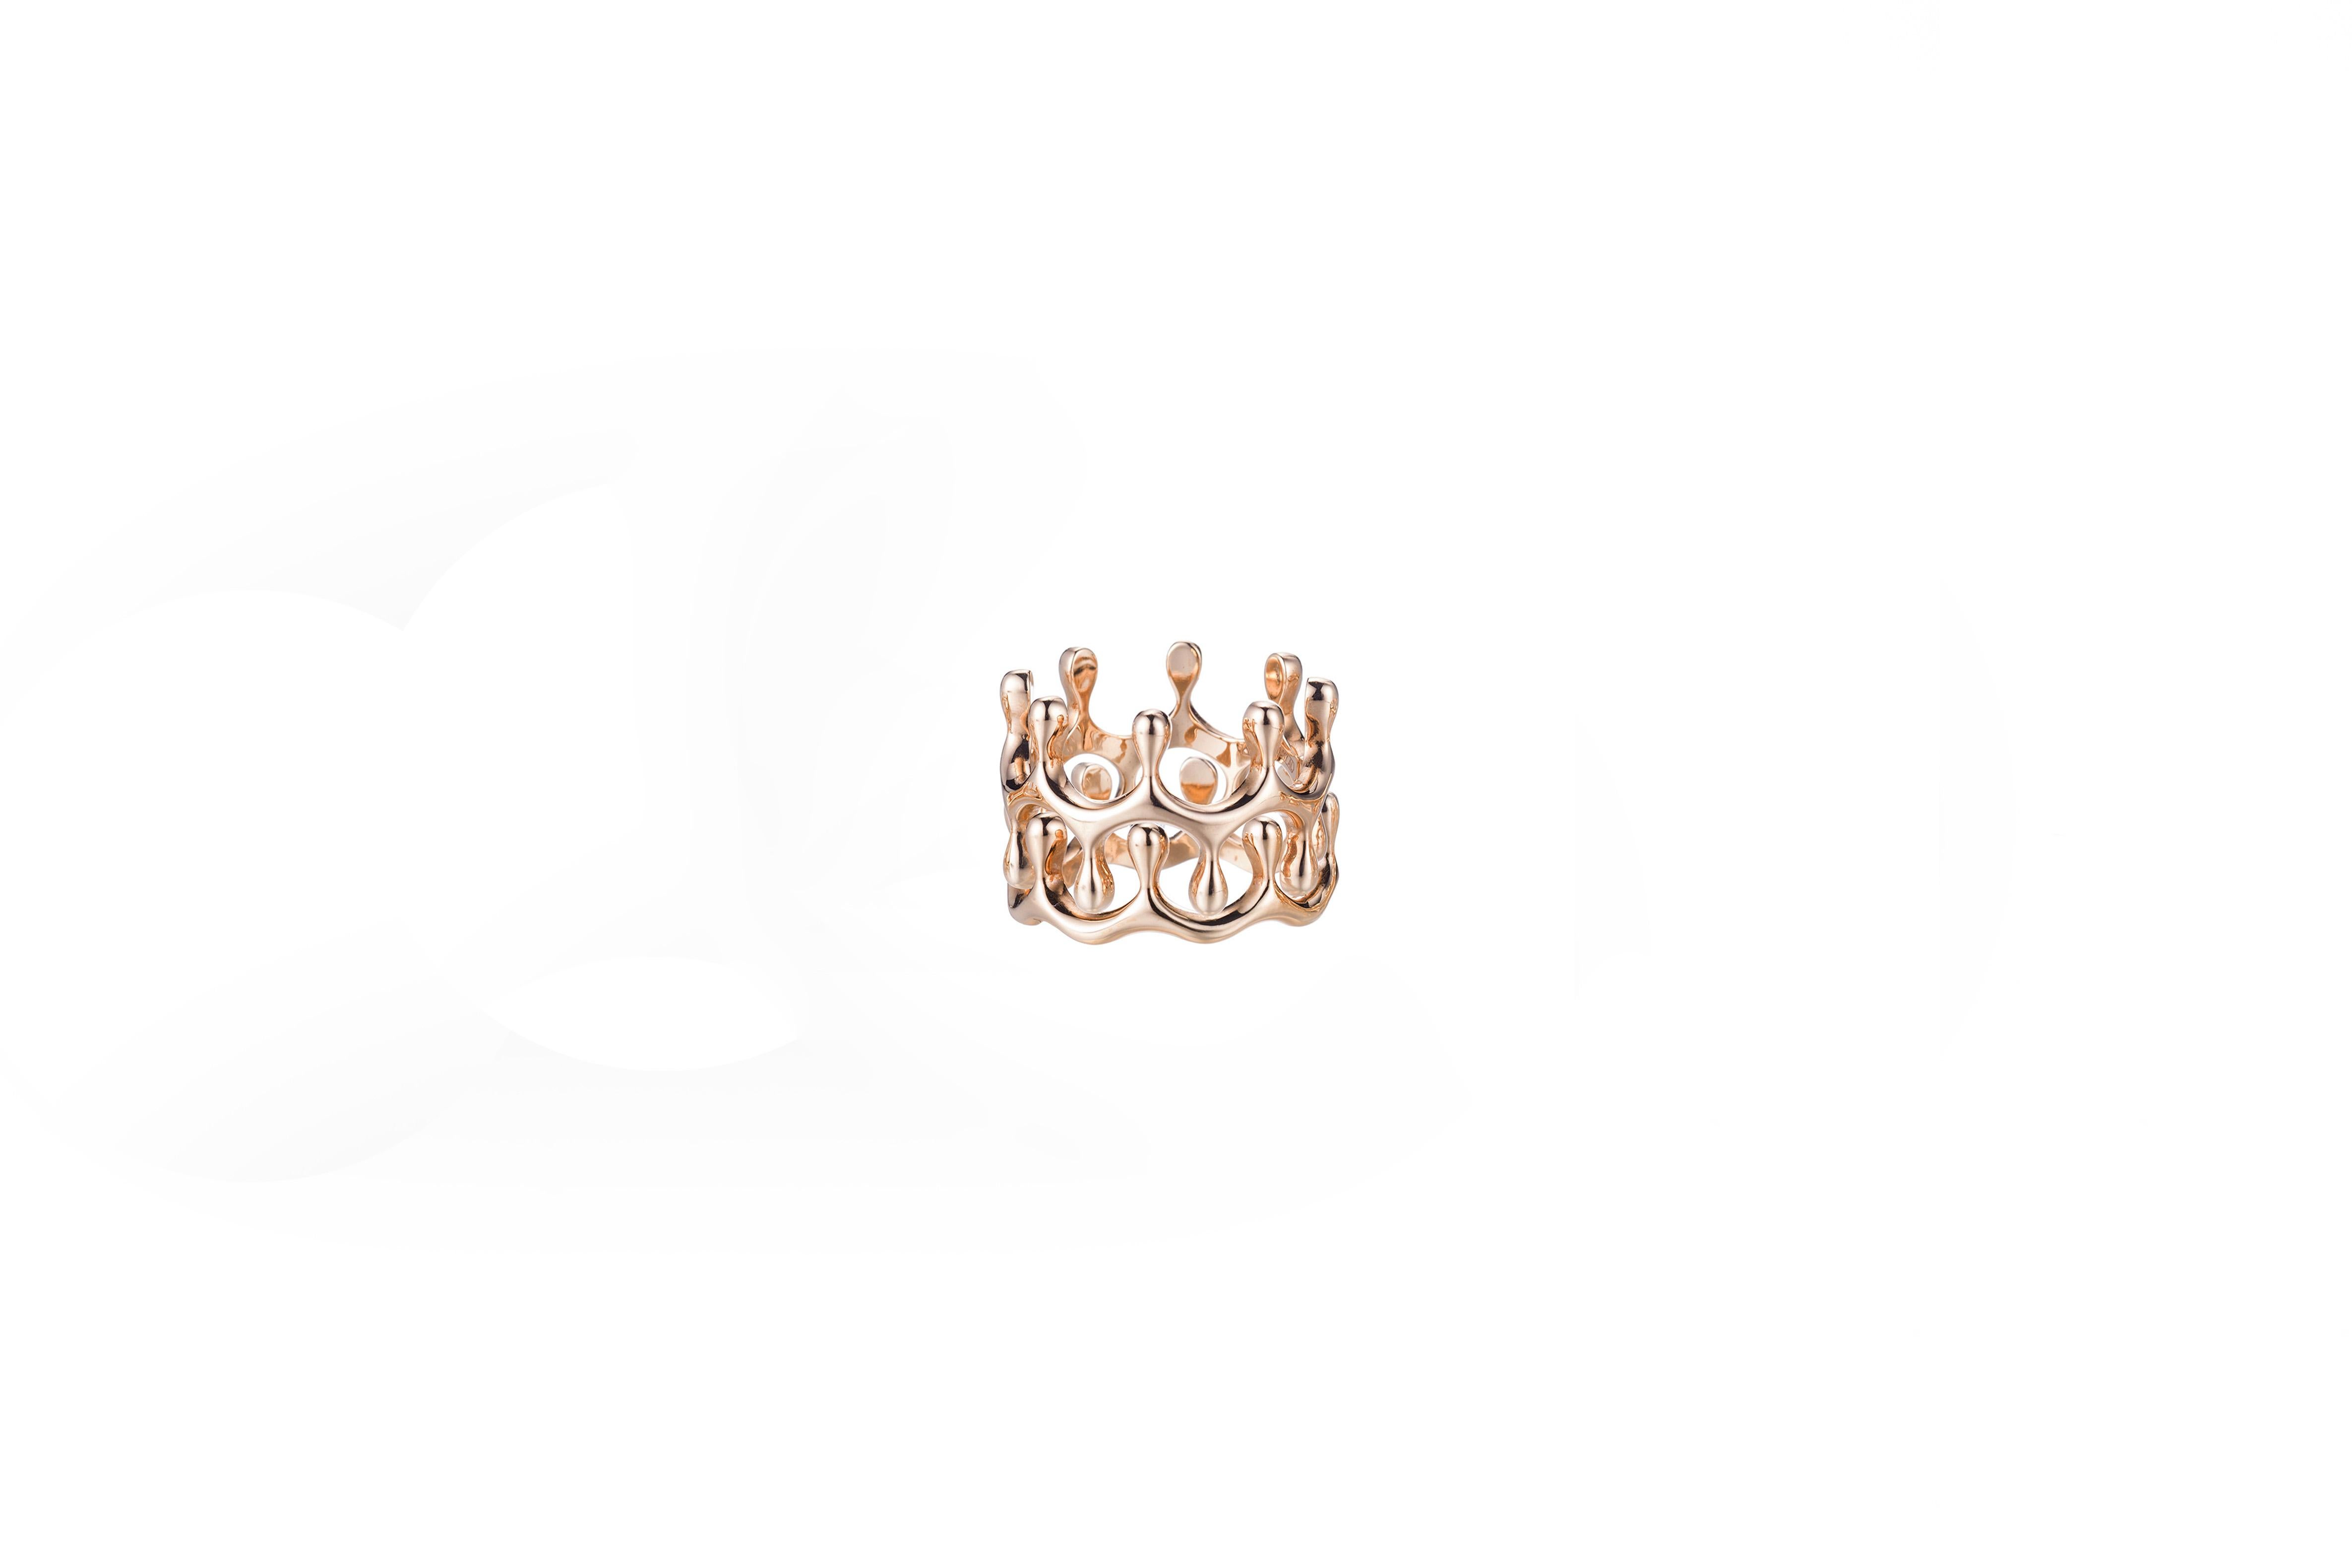 Alone or in pairs, or on different fingers,  it can be rearranged differently every day, to create a new ring and a new-found love every day.
It is a piece of jewellery that never grows old.
A playful ring made up of three crown-shaped rings that